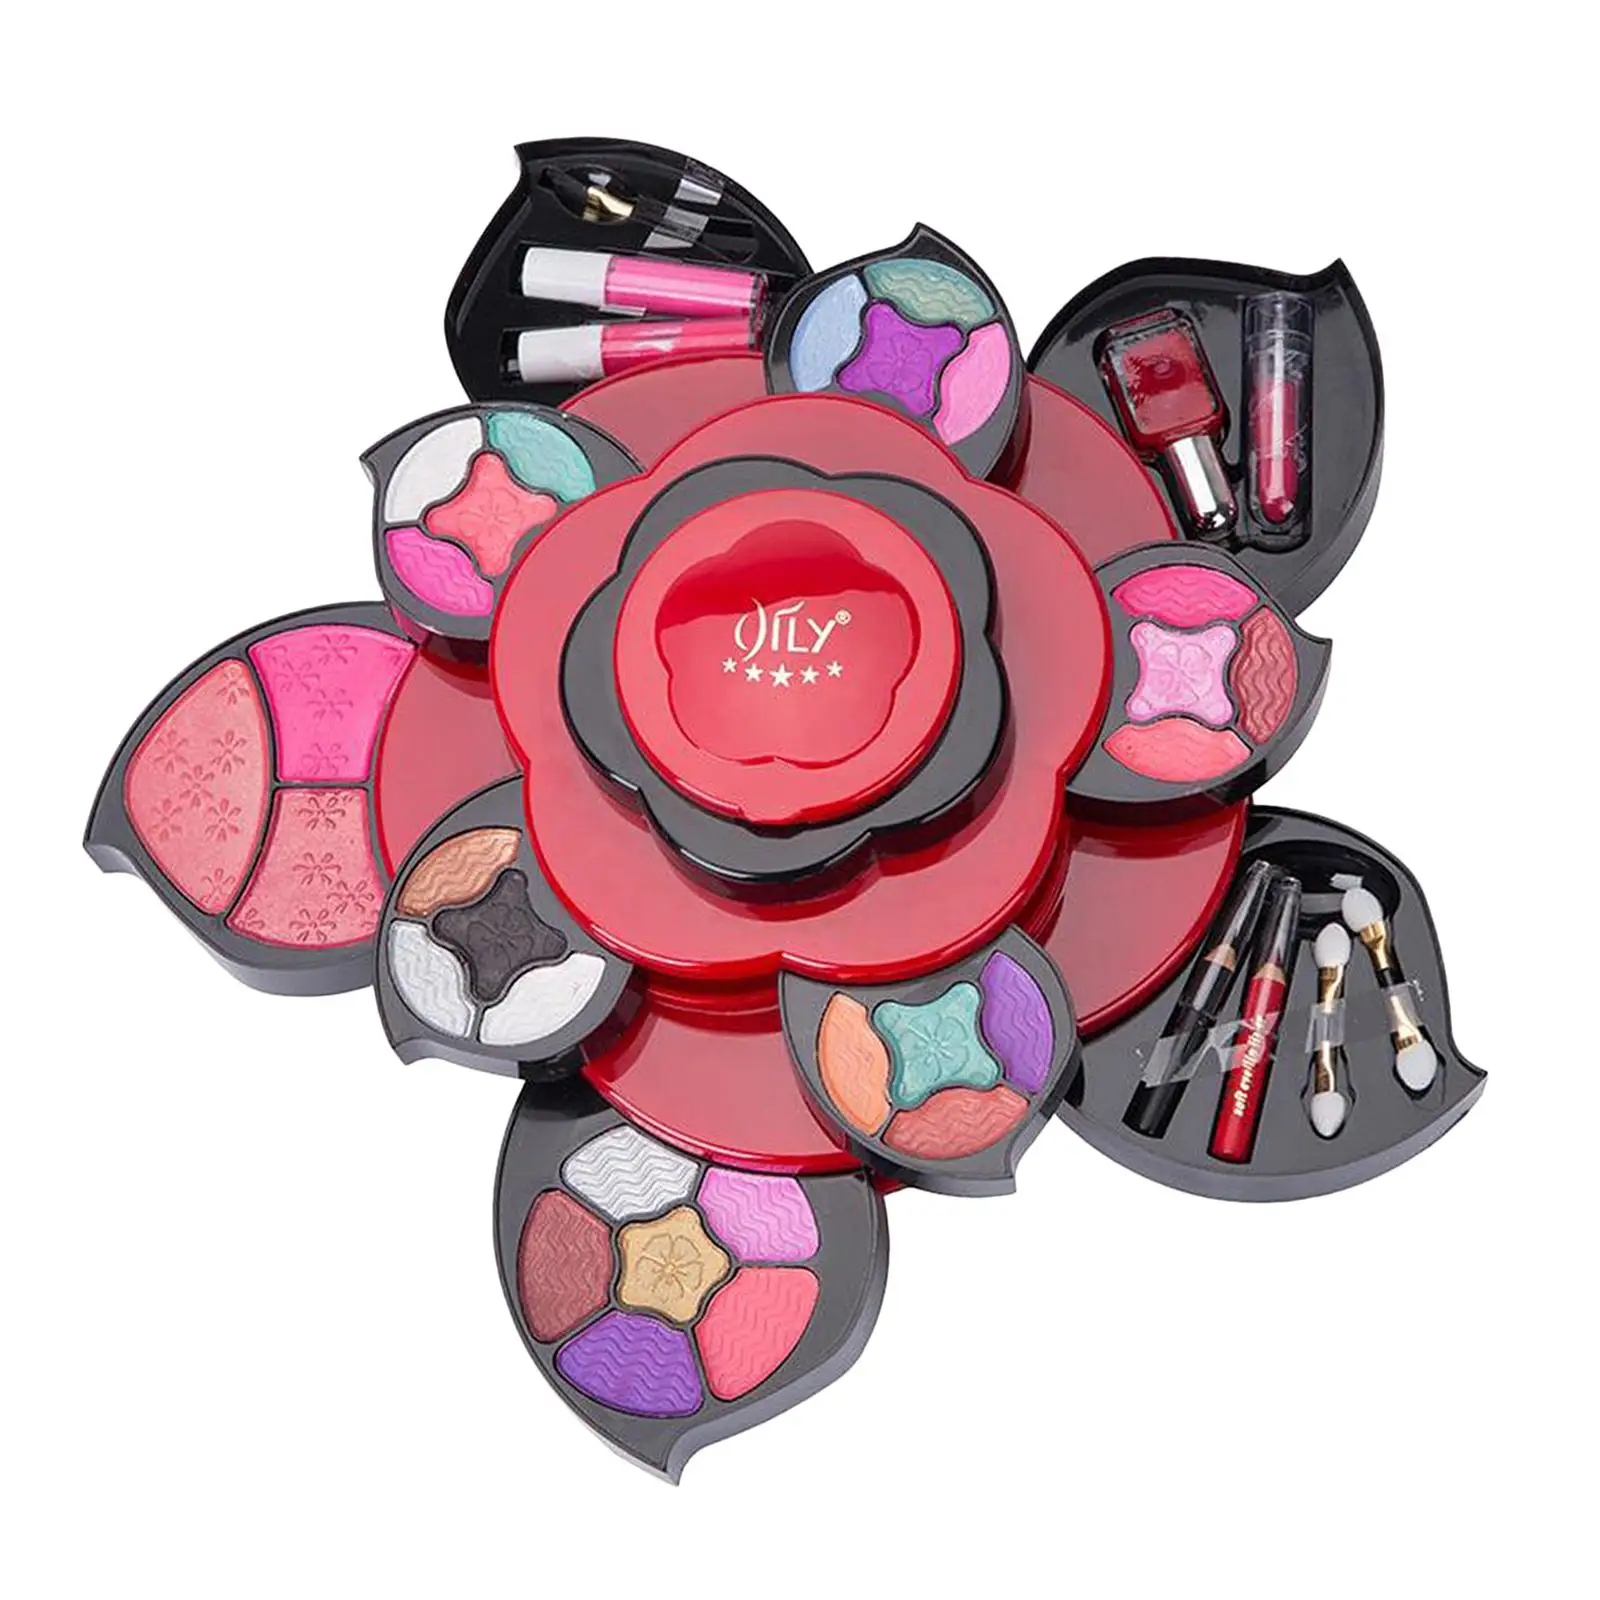 Makeup Kits for Teens Flower Pallete Gift Set for Girls Variety Shade Array